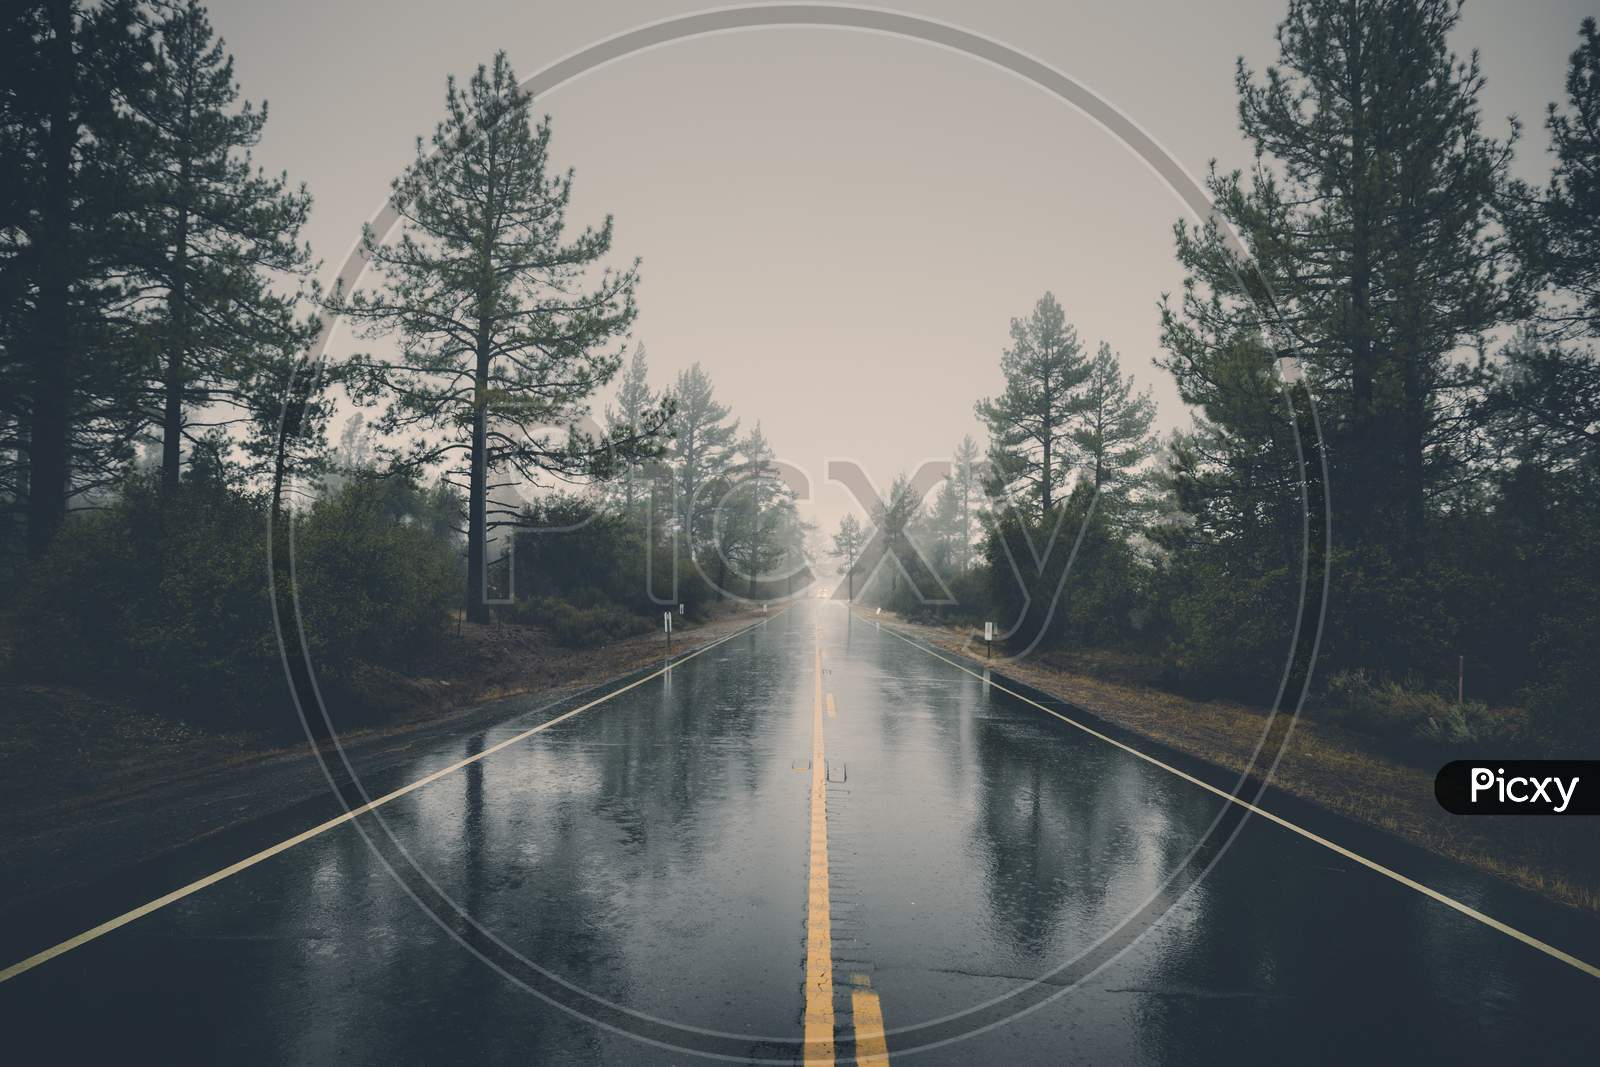 Empty Highway In Rain. Perfect asphalt mountain road in overcast rainy day. Roadway with reflection and trees in fog. Vintage style. Transportation.